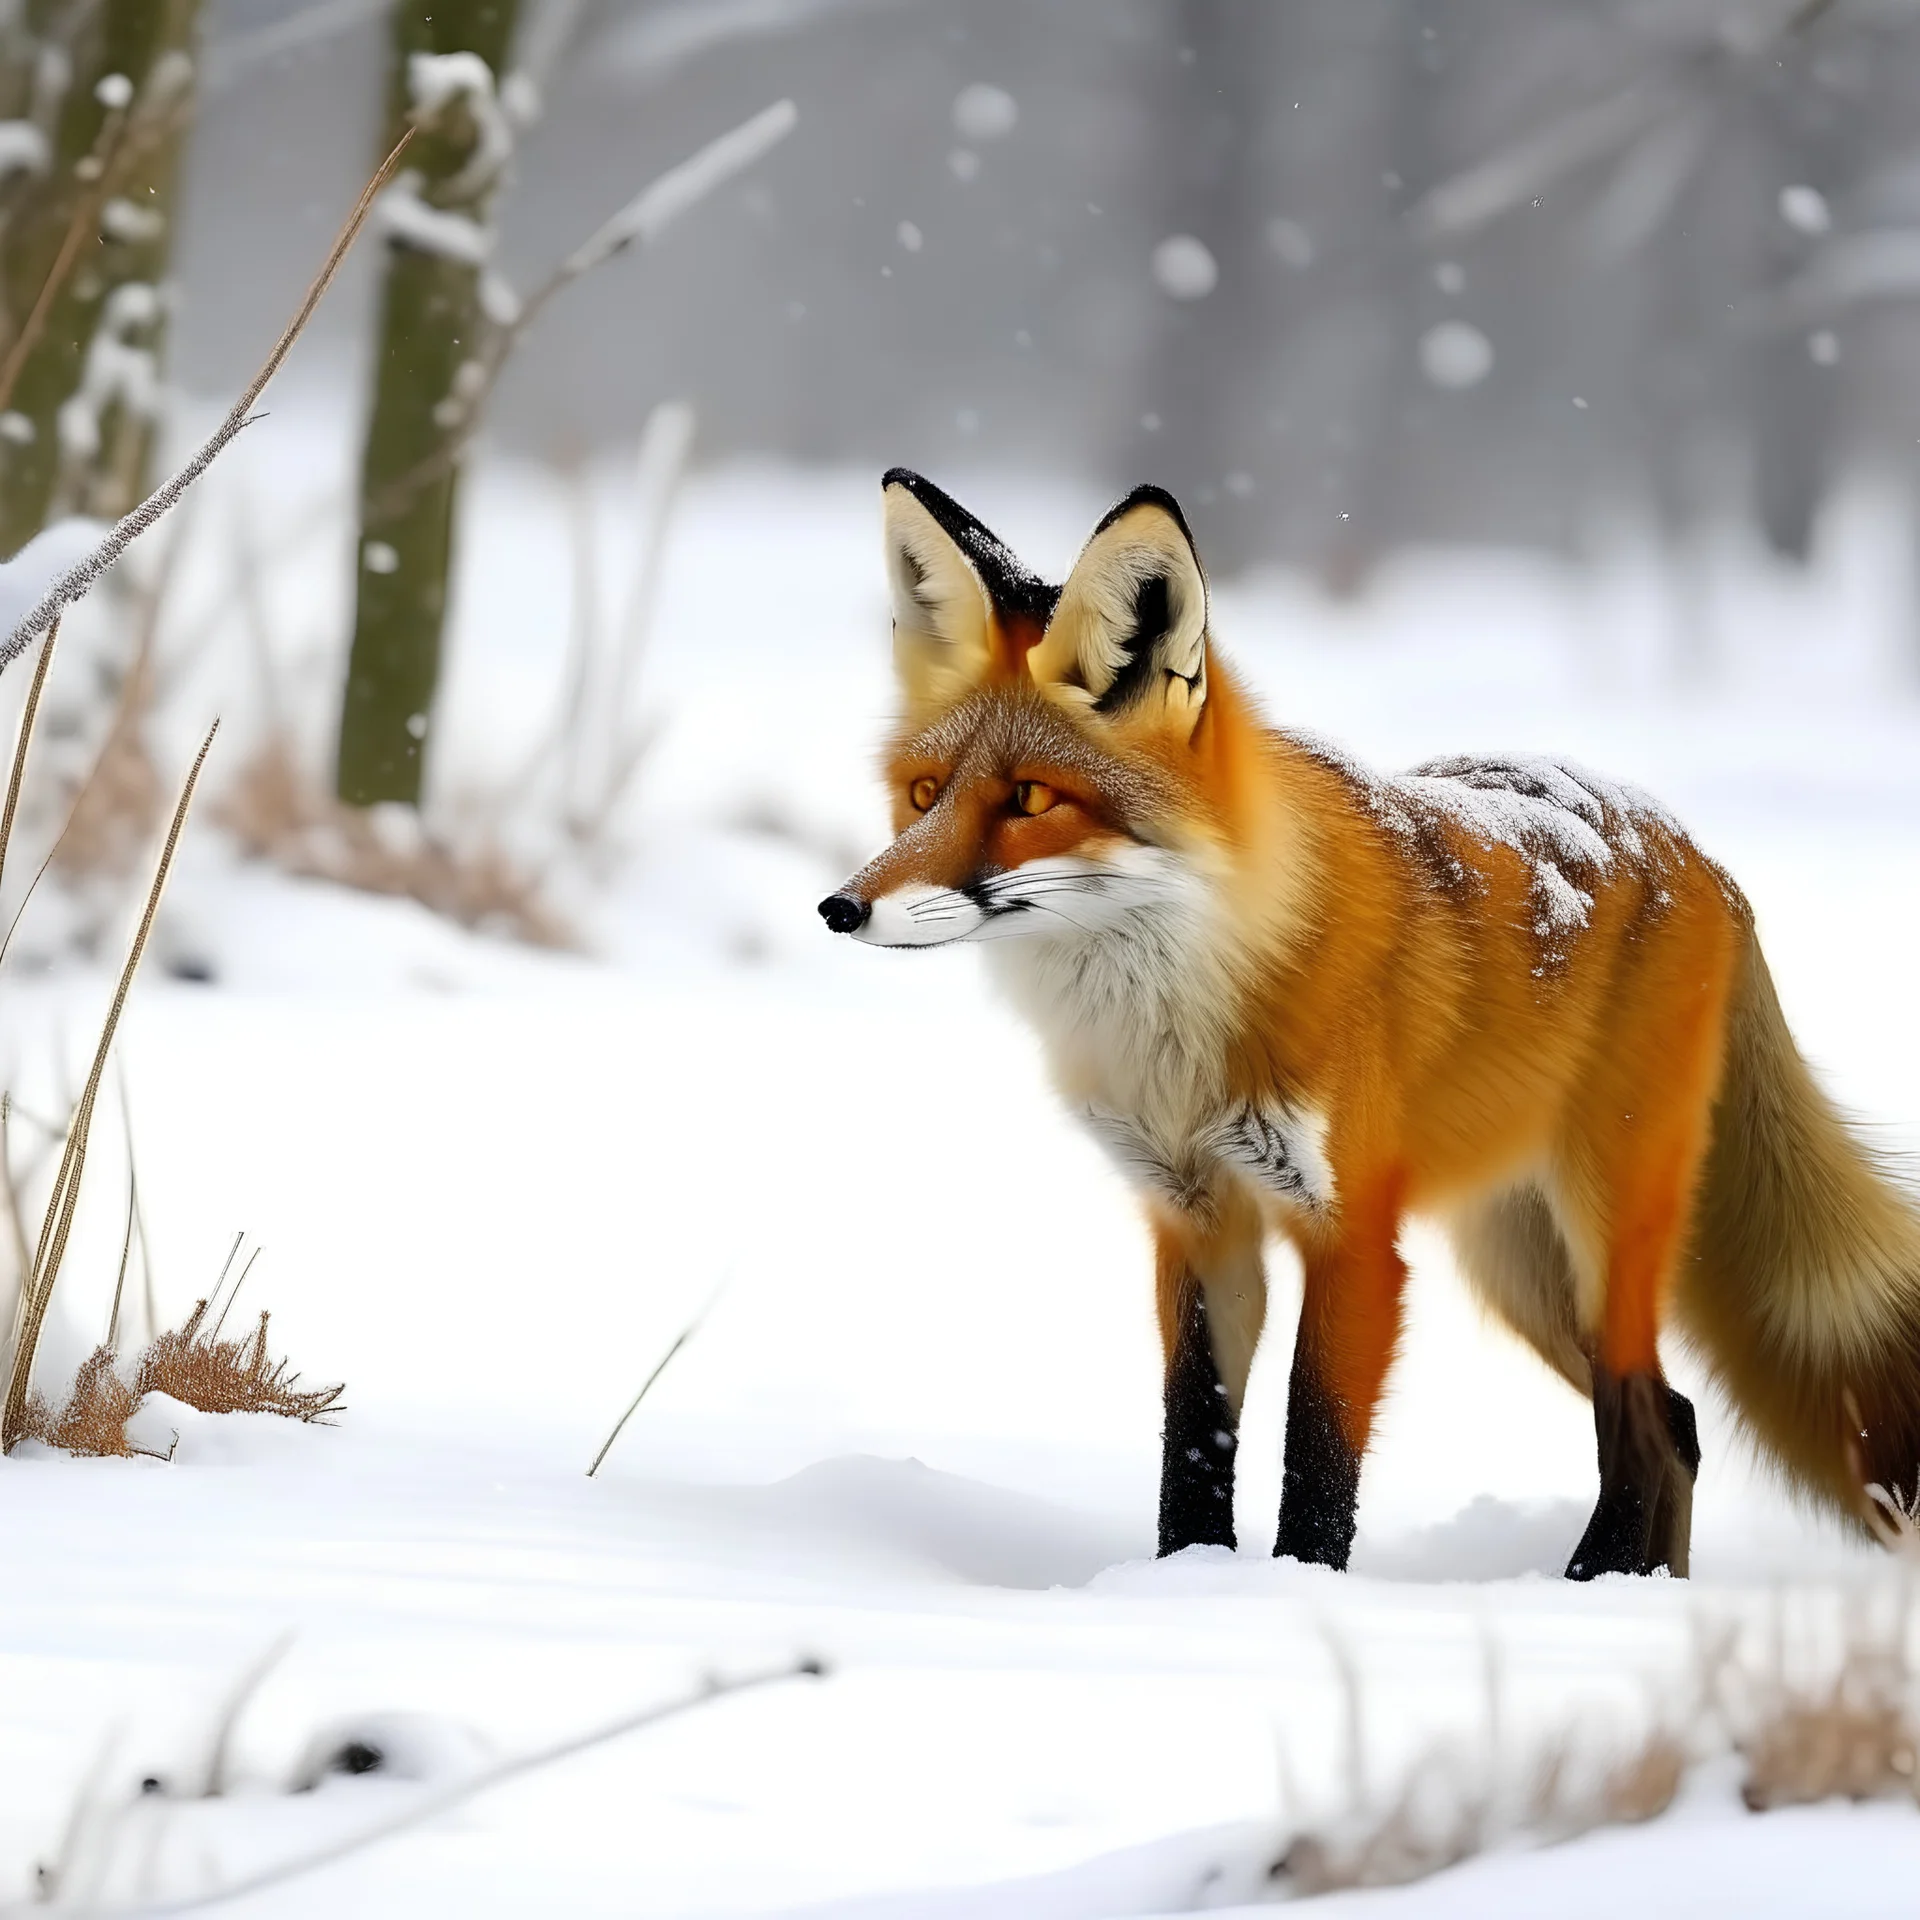 old picture of a red fox in snow